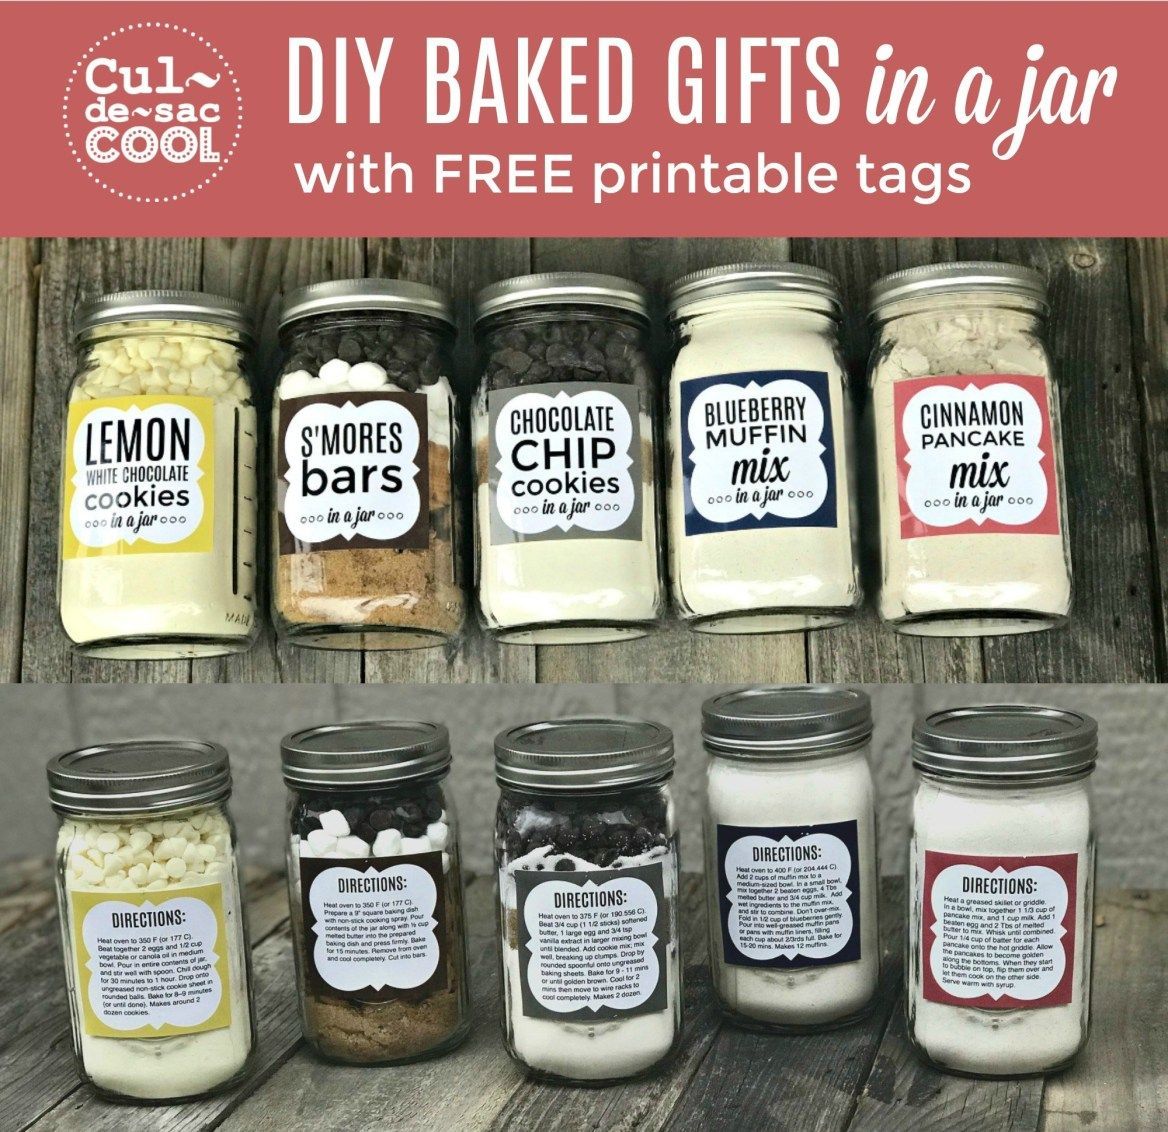 5 DIY Baked Gifts in a Jar with FREE Printable Recipe Tags — Part 2 - 5 DIY Baked Gifts in a Jar with FREE Printable Recipe Tags — Part 2 -   19 diy Food gifts ideas